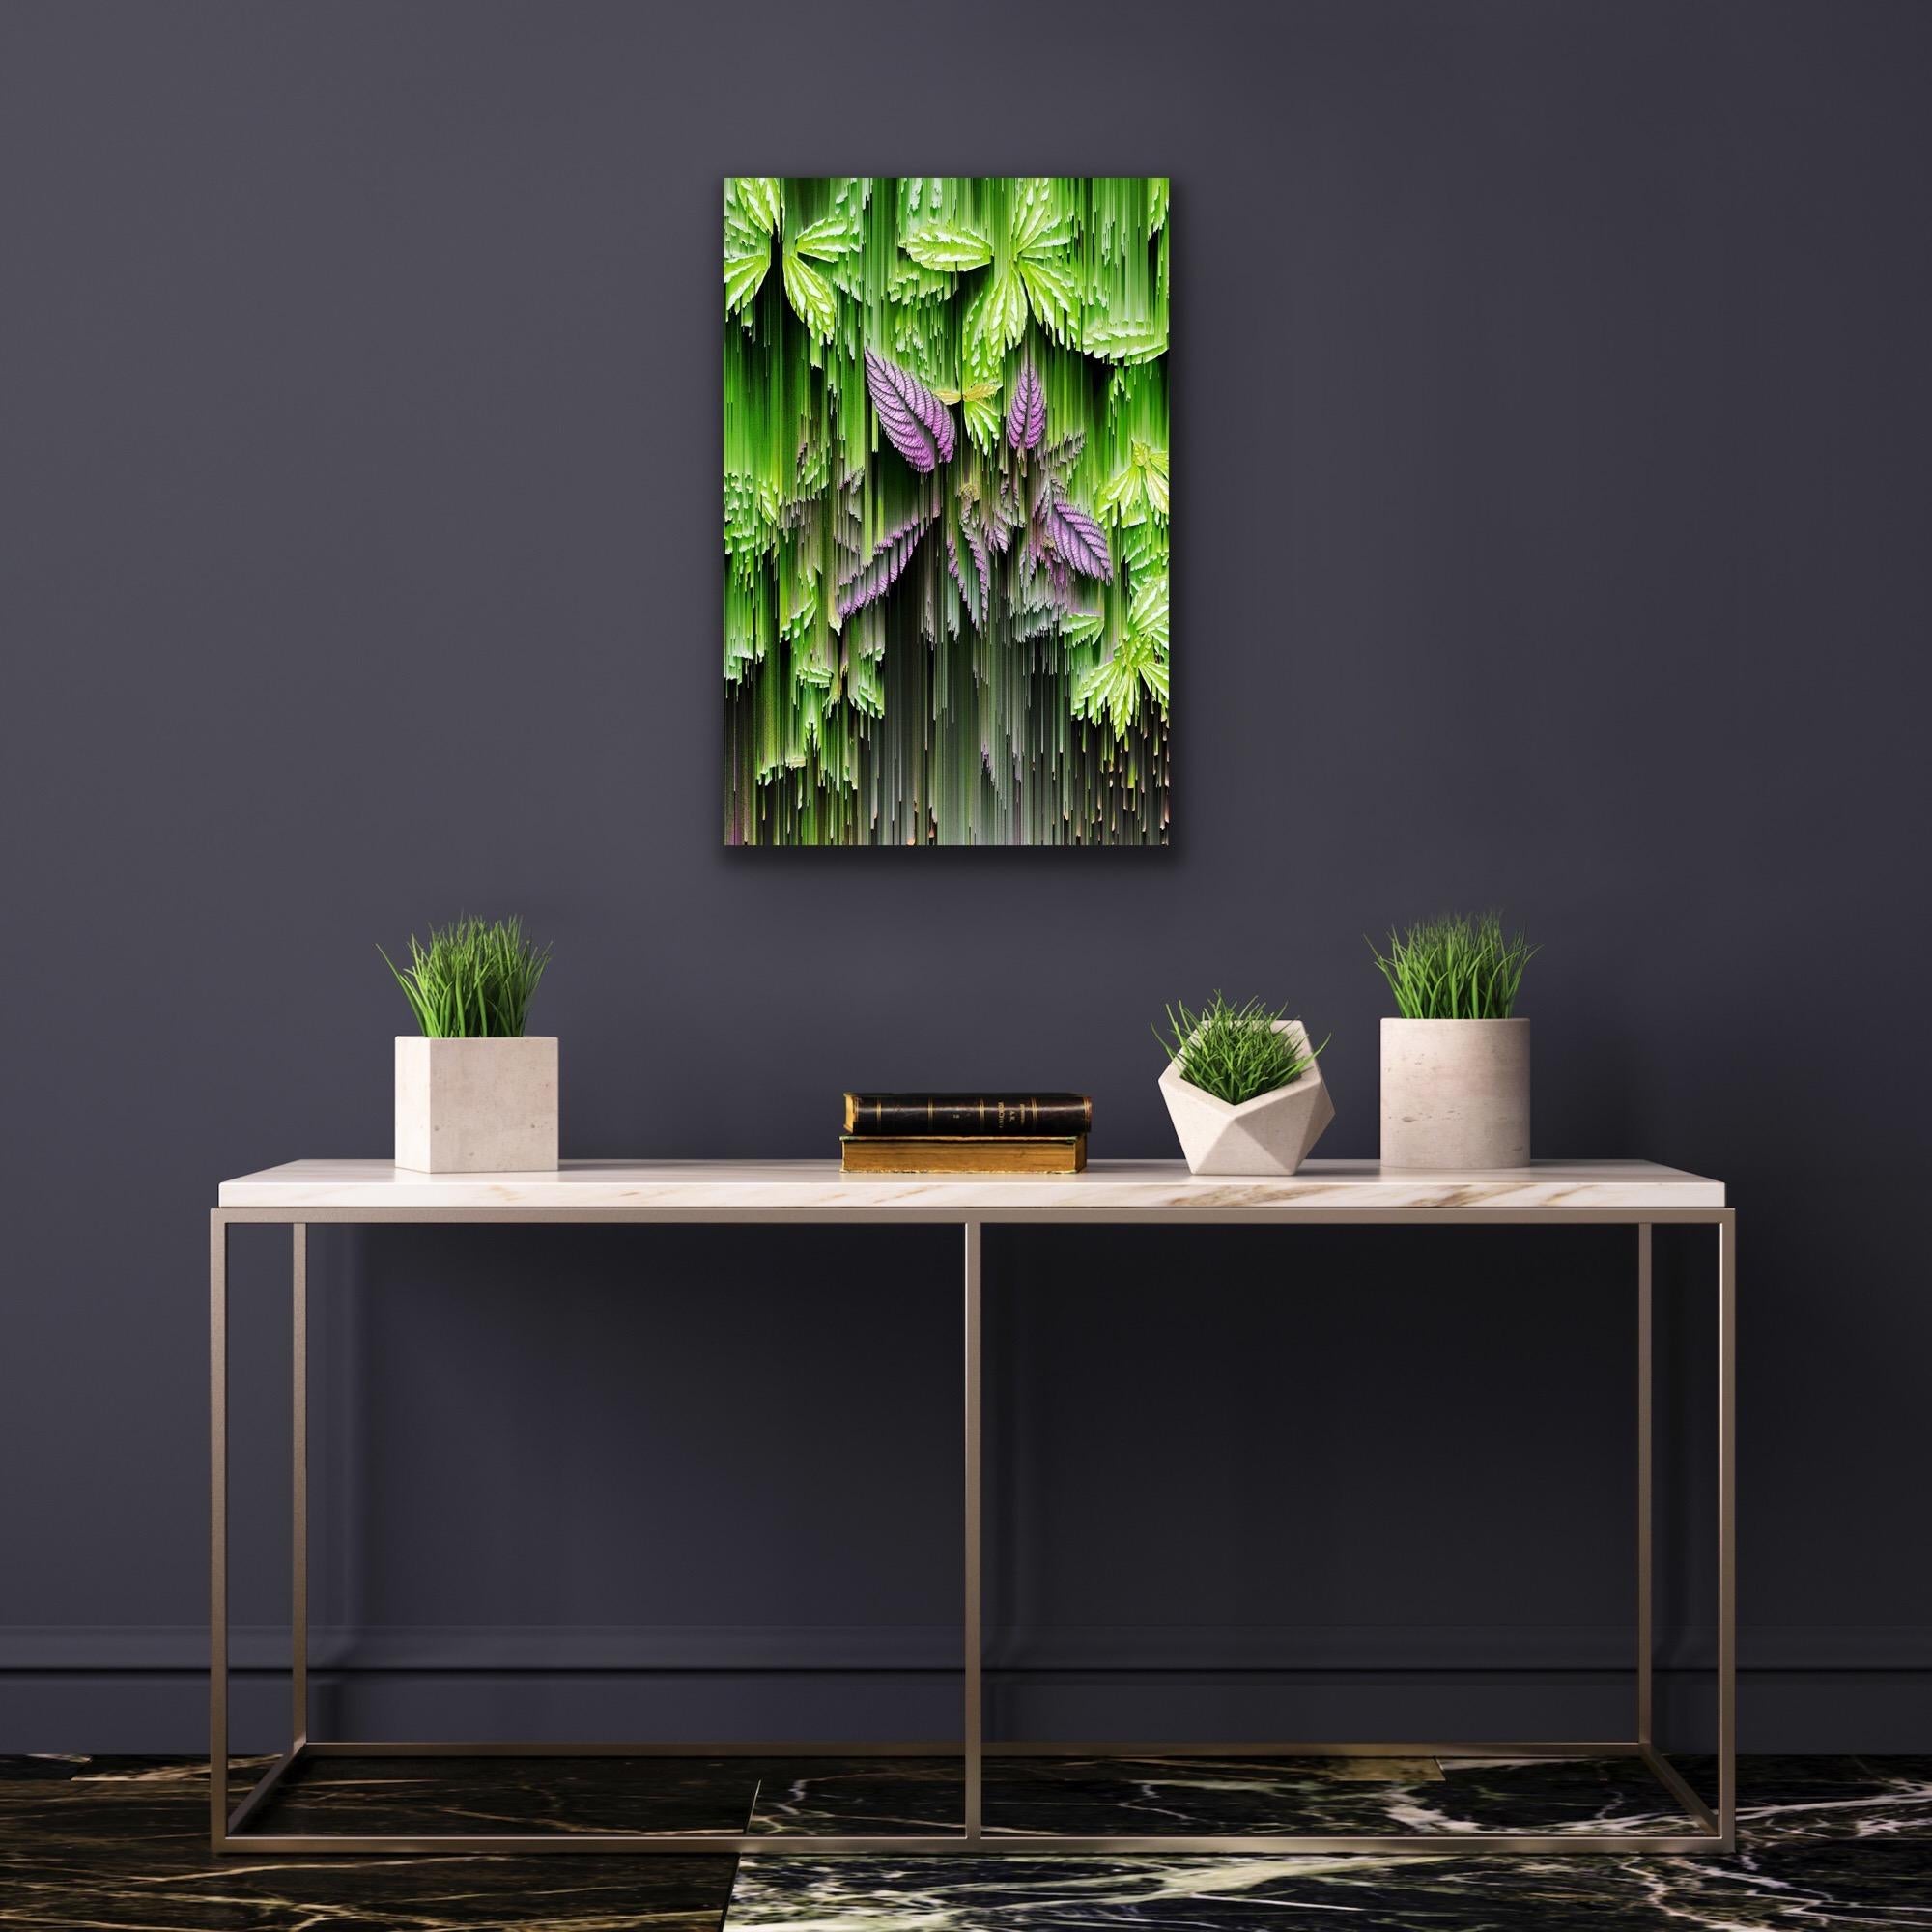 Outnumbered, Abstract Floral Art, Green and Pink Art, Futuristic Digital Art For Sale 3